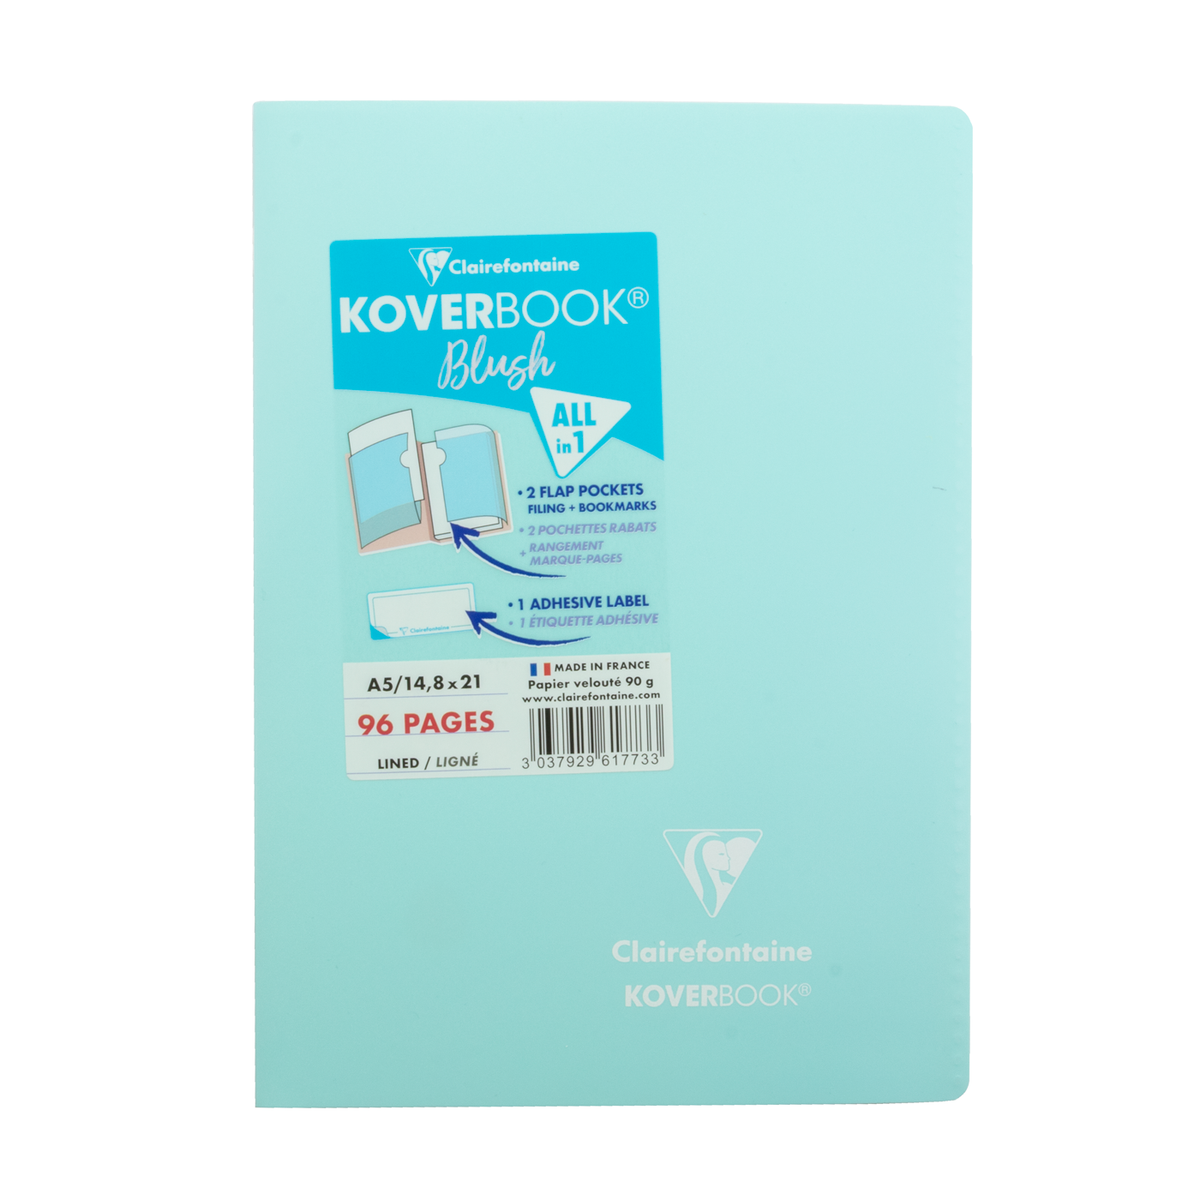 Clairefontaine Koverbook Blush- Staplebound Notebook (48 Sheets) - A5 - Menthe